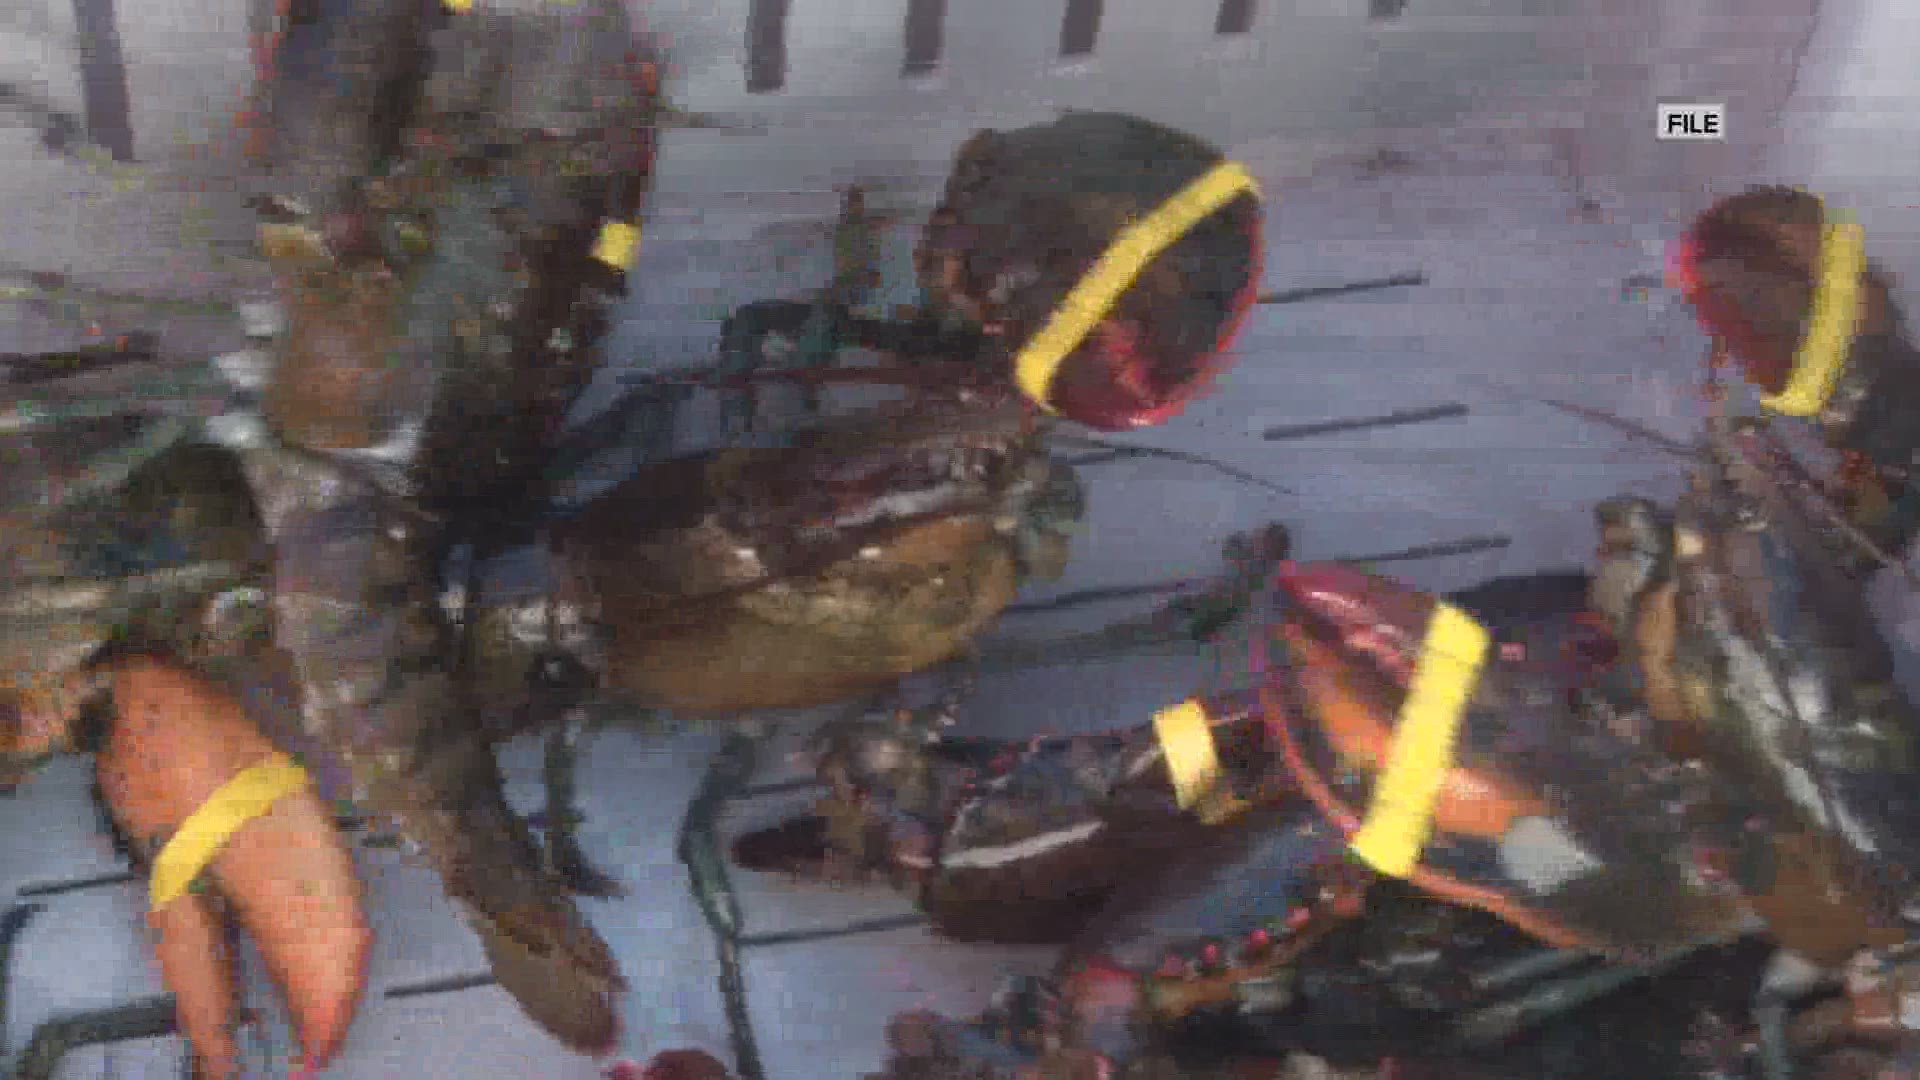 Data shows that Maine's lobster industry peaked during president Obama's presidency